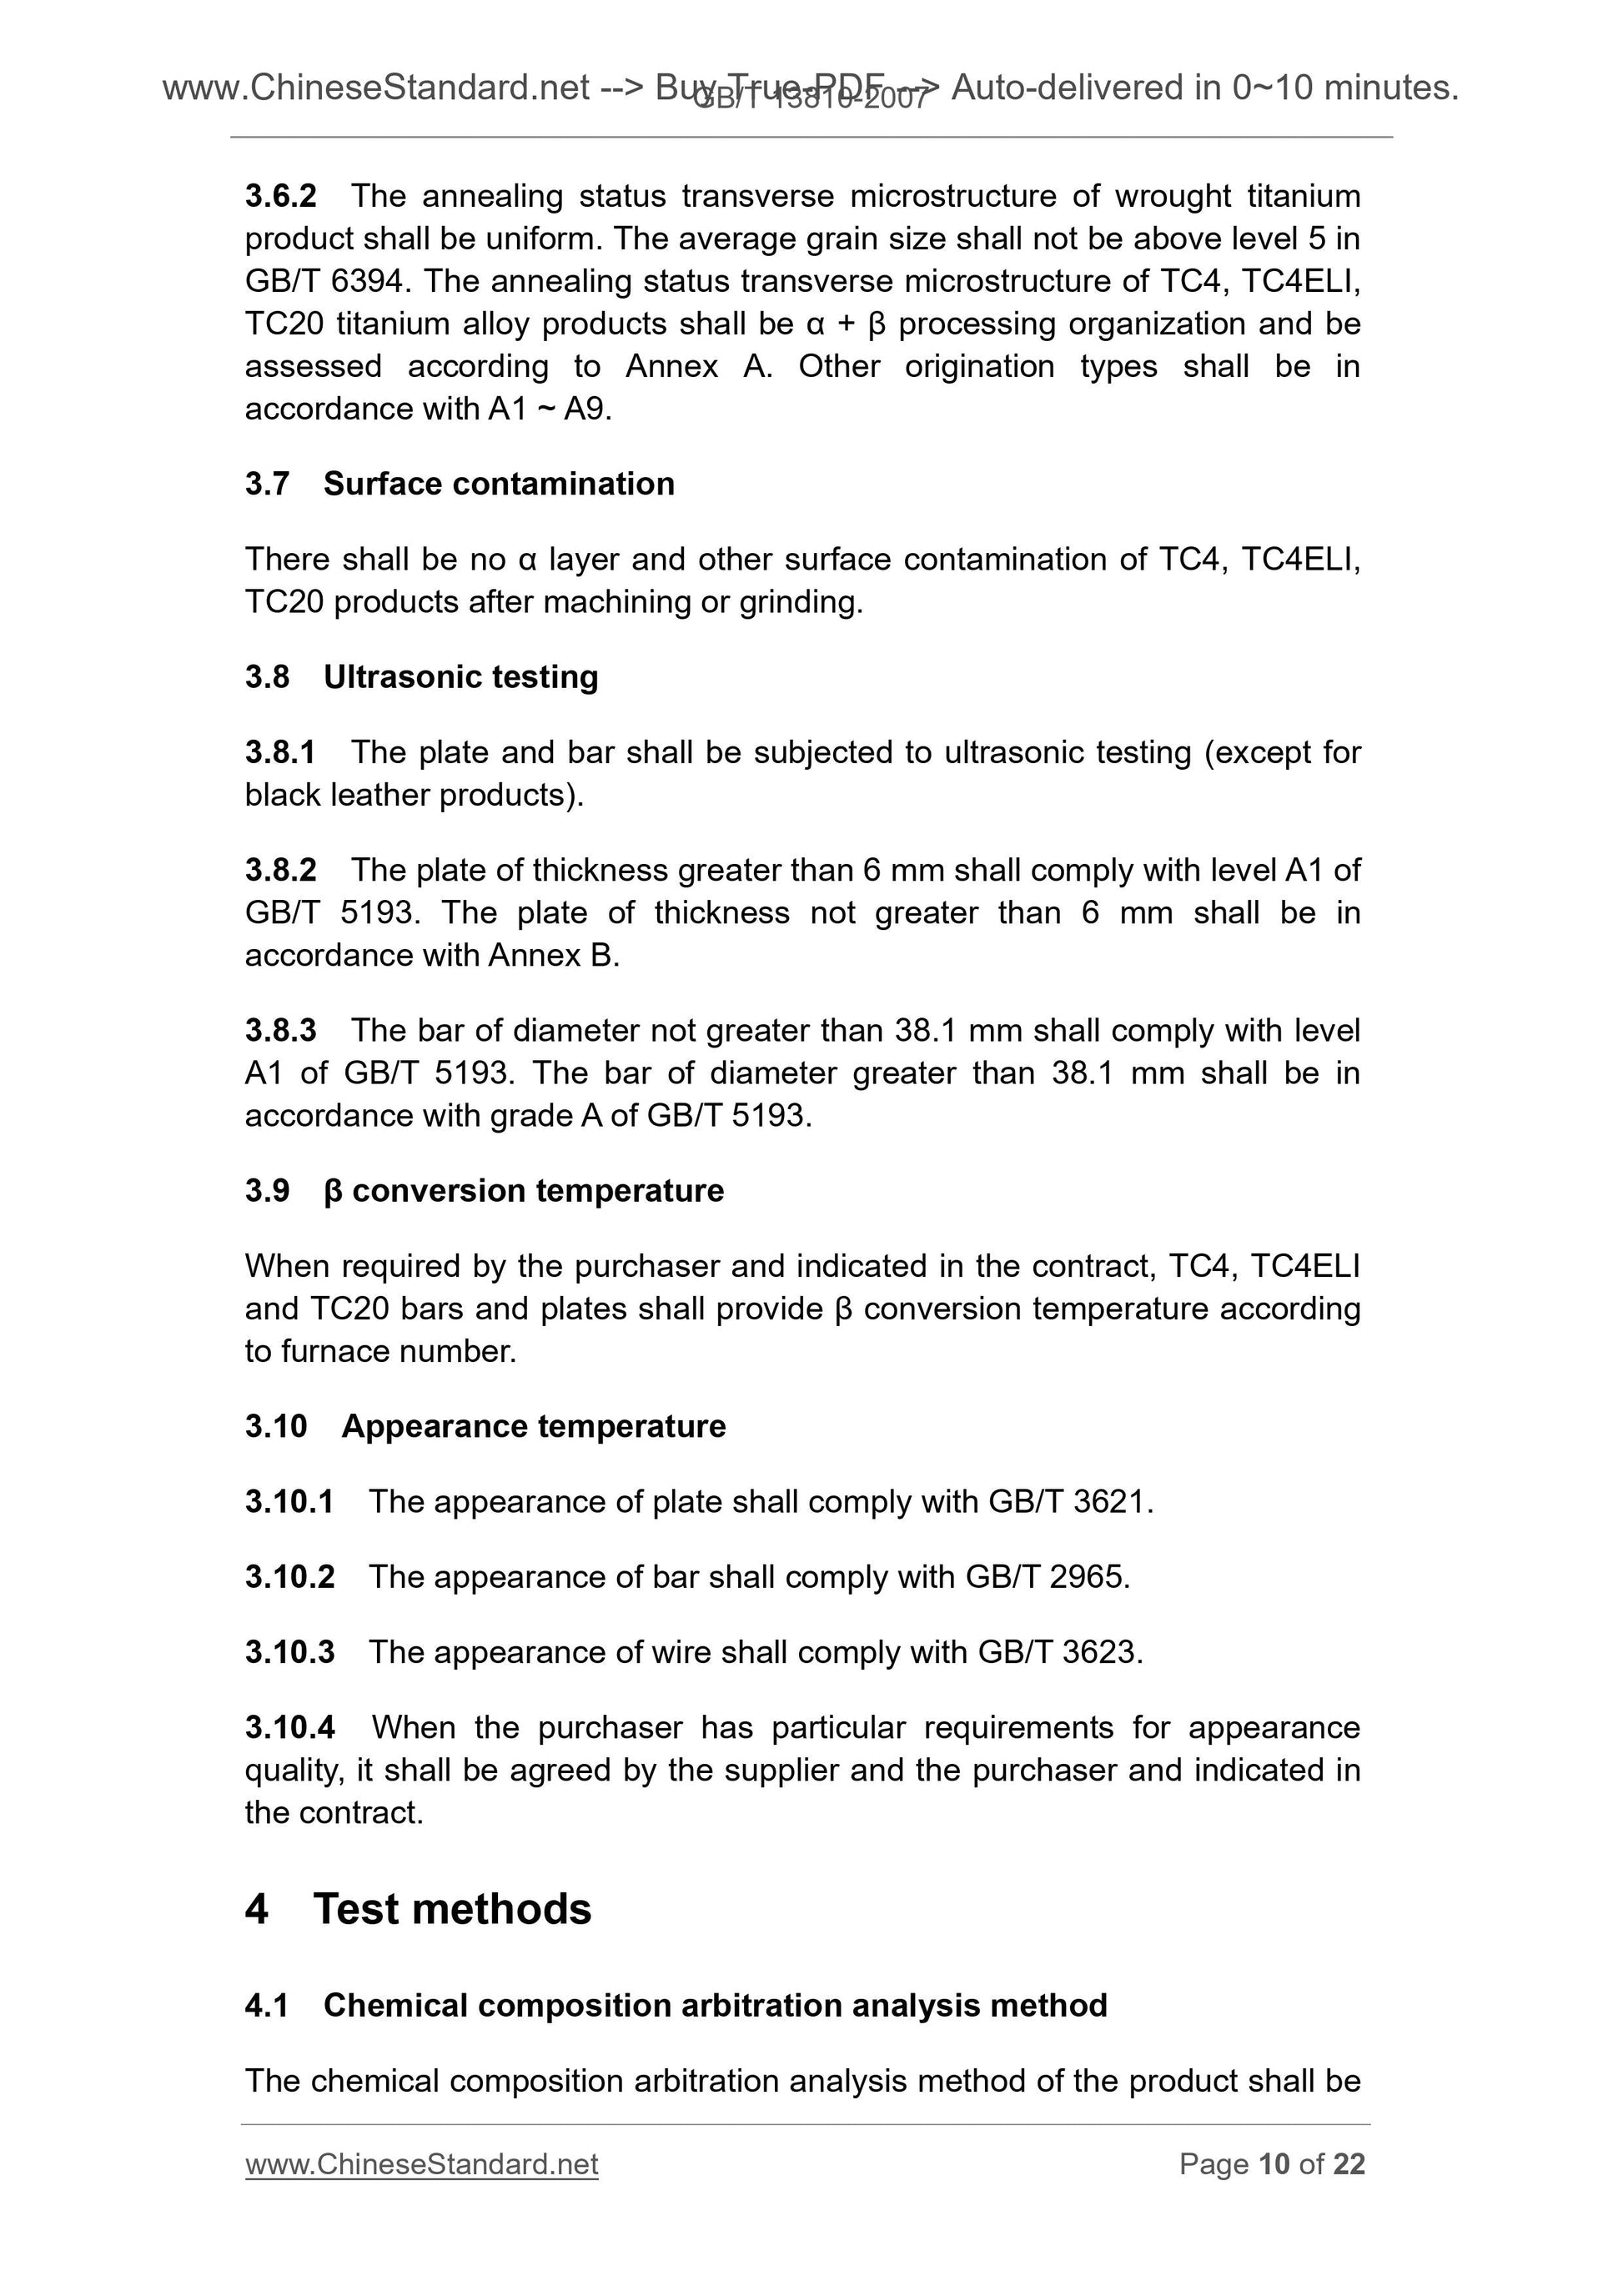 GB/T 13810-2007 Page 6